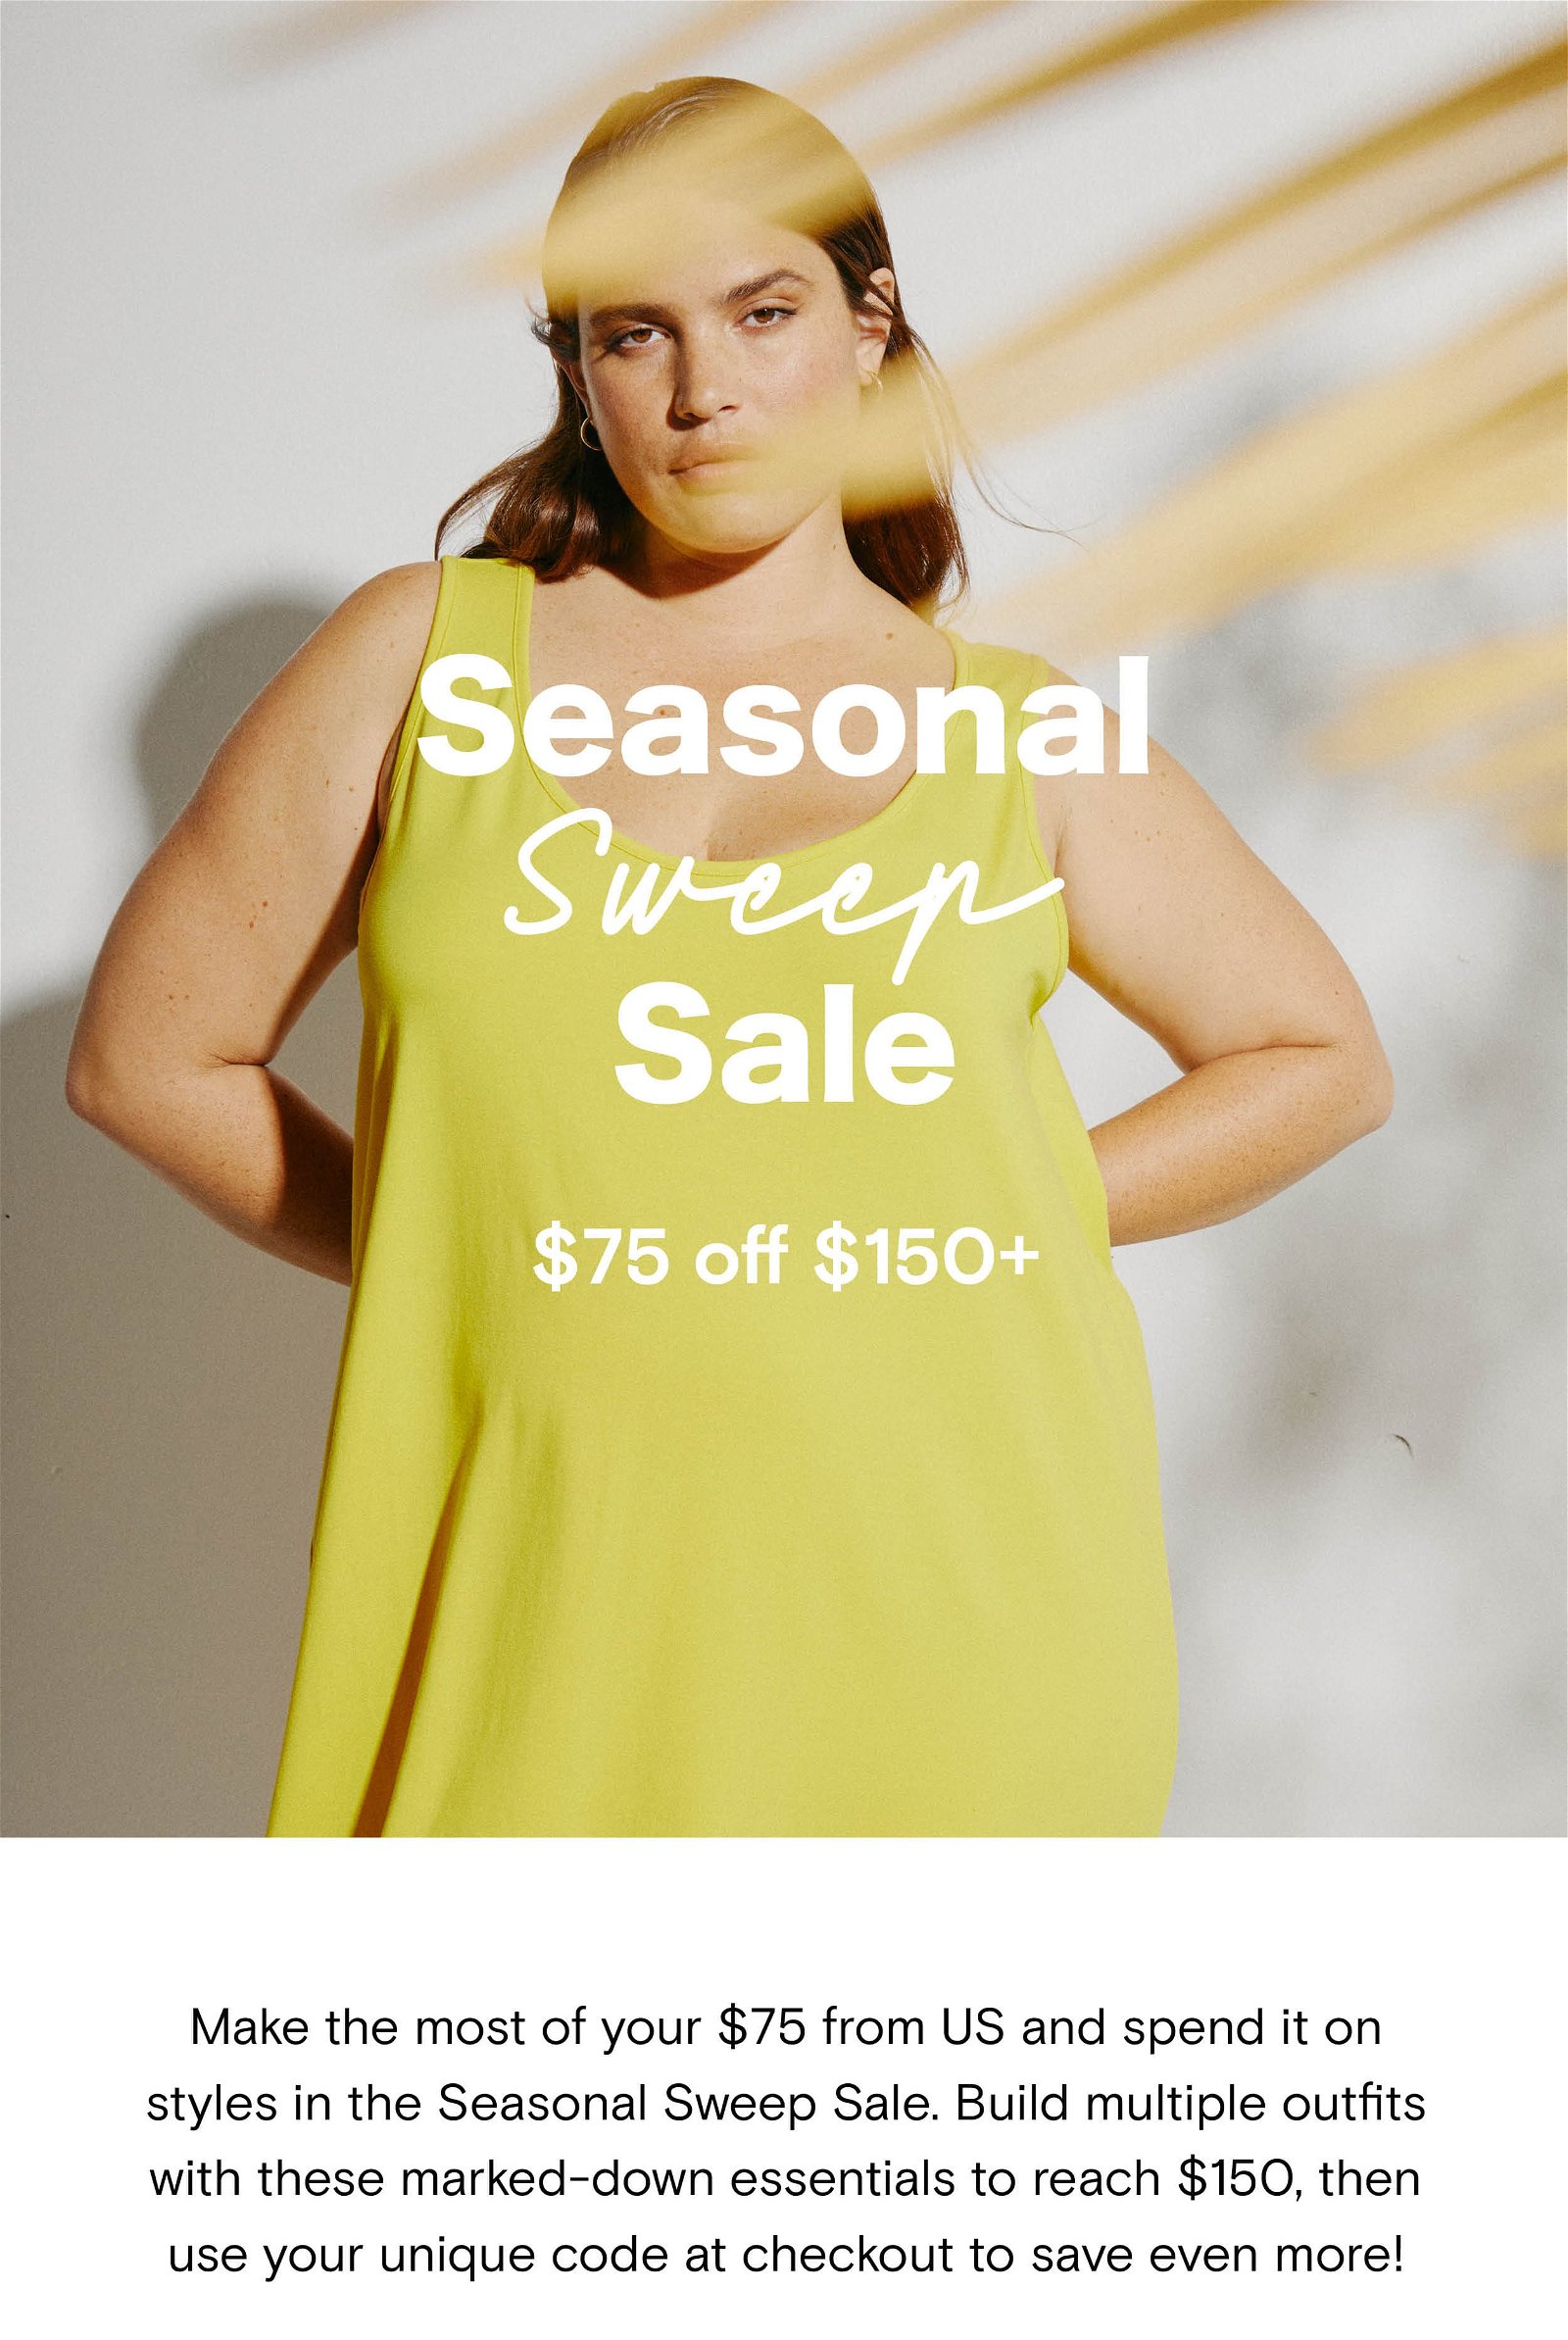 Make the most of your $75 from US and spend it on styles in the Seasonal Sweep Sale. Build multiple outfits with these marked-down essentials to reach $150, then use your unique code at checkout to save even more!